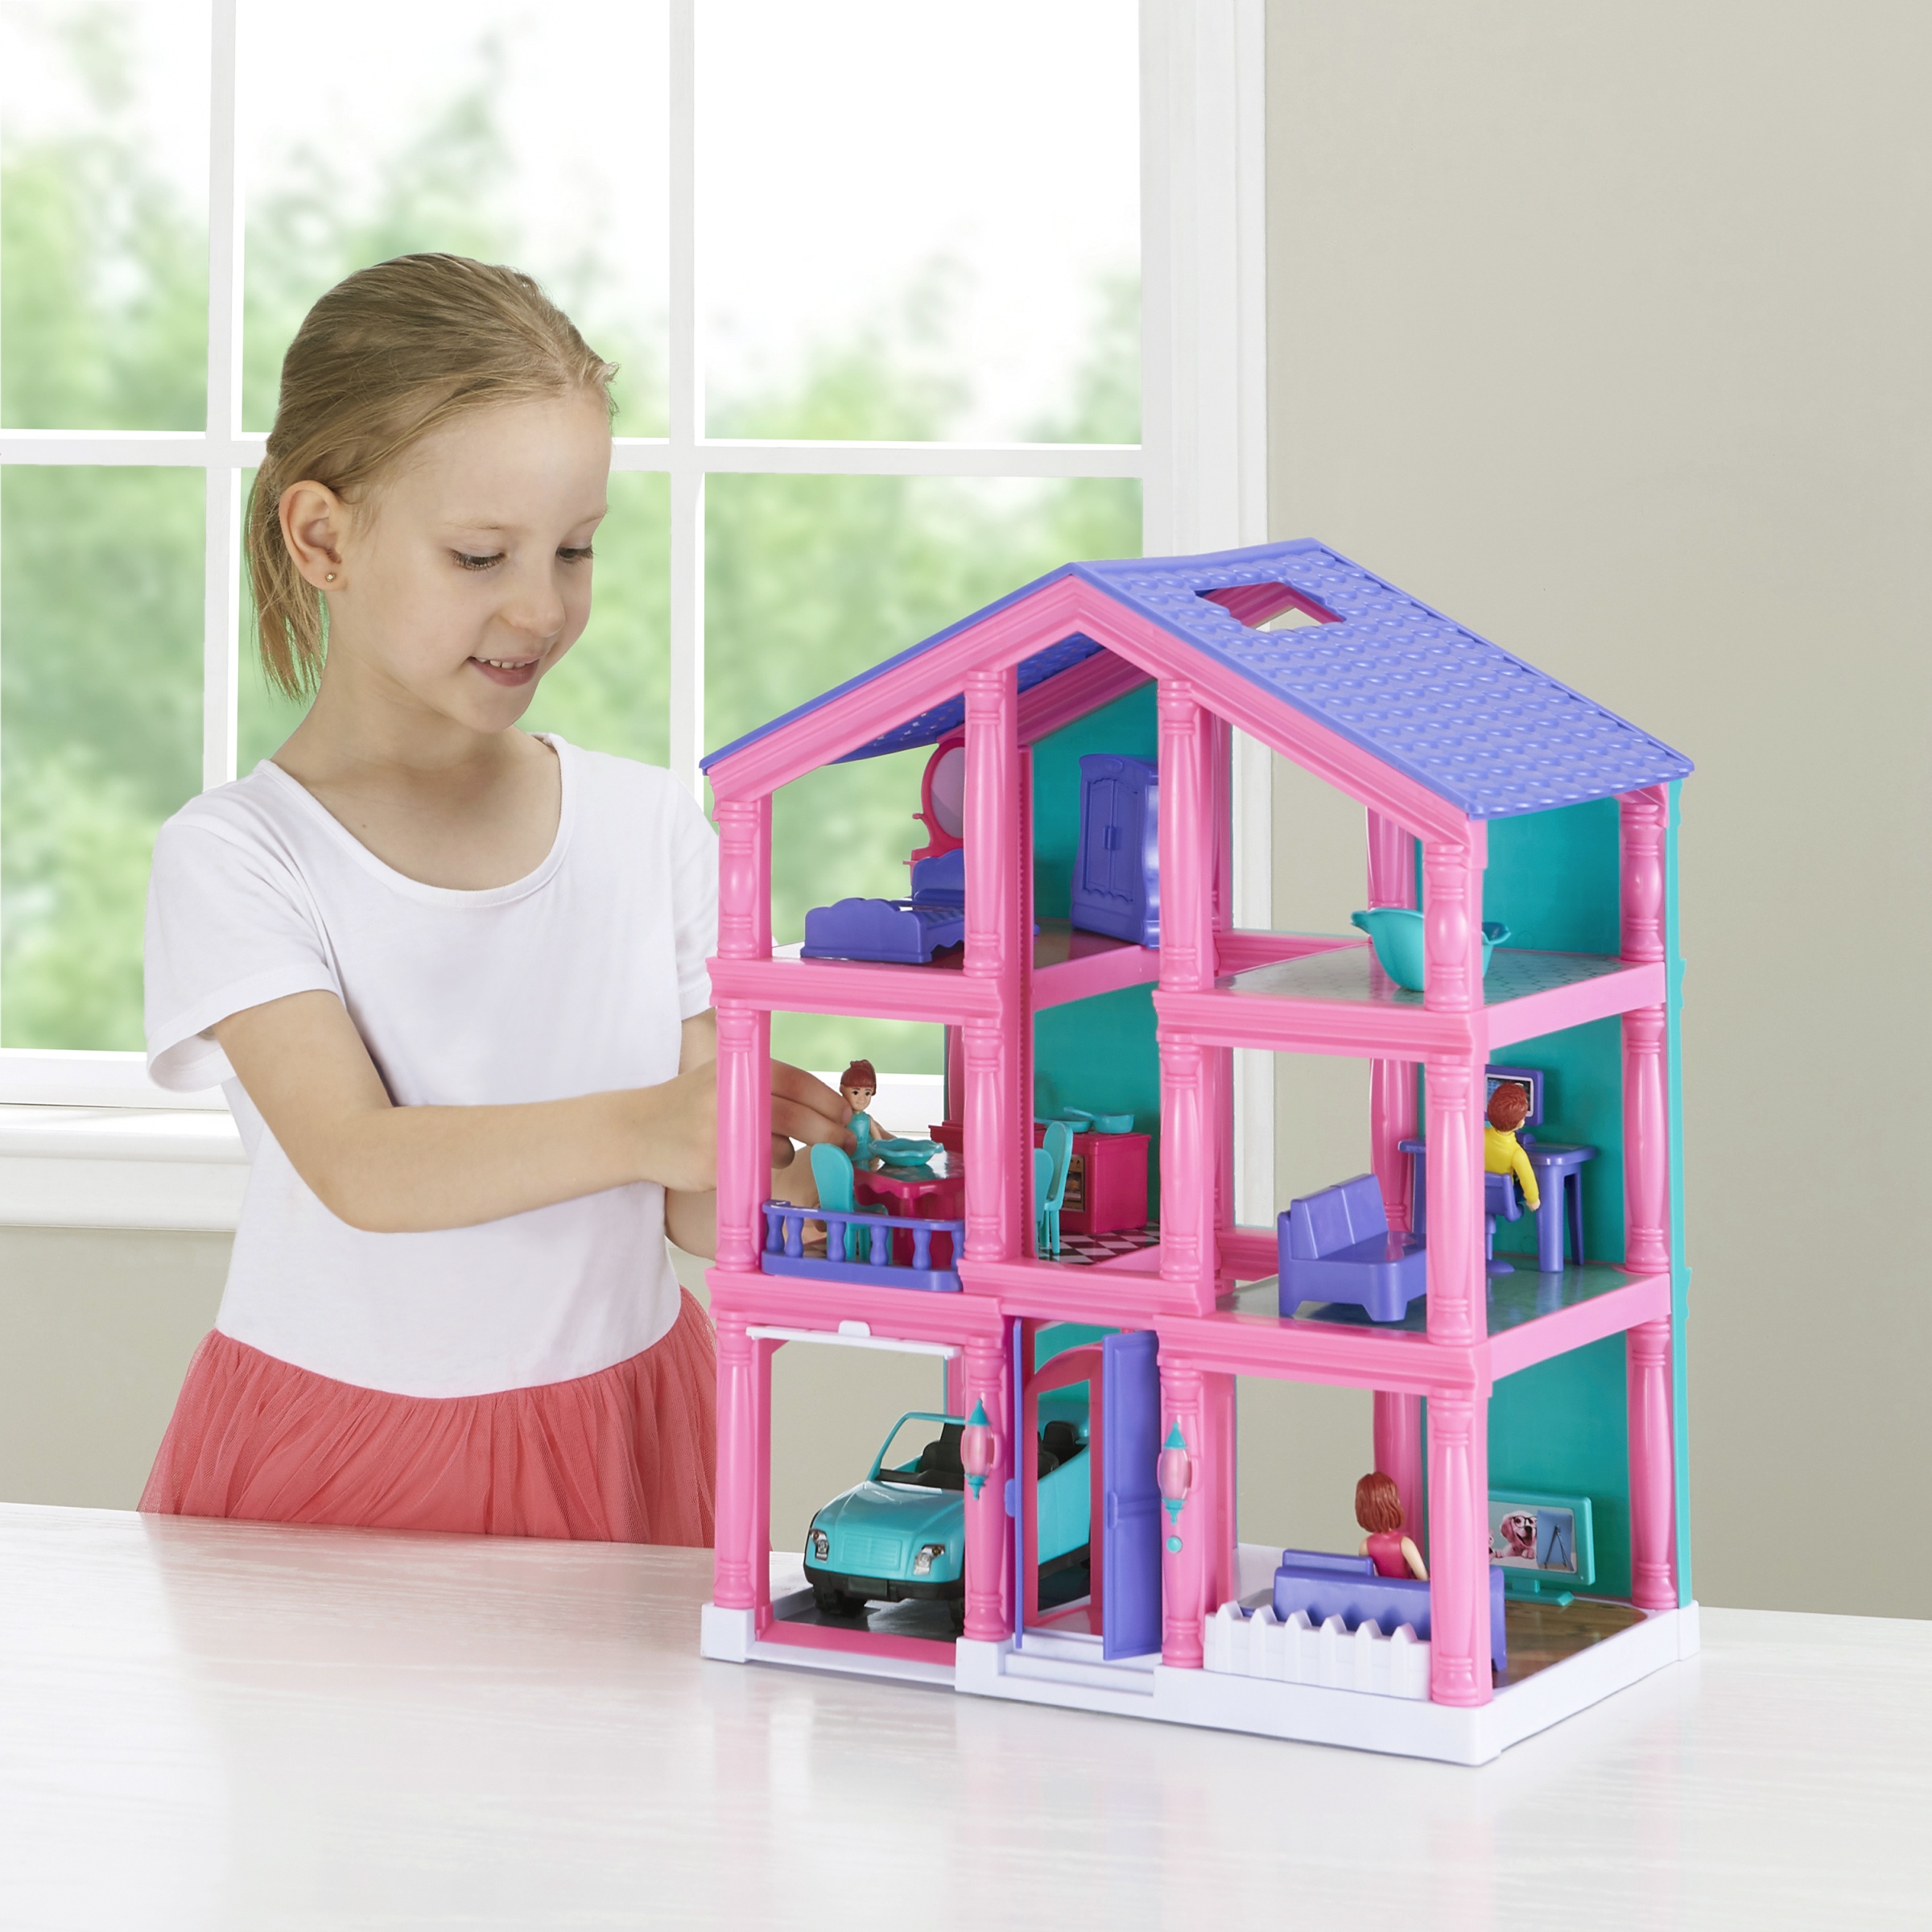 Kid Connection 3-Story Dollhouse Play Set with Working Garage and Elevator, 24 Pieces - image 5 of 6